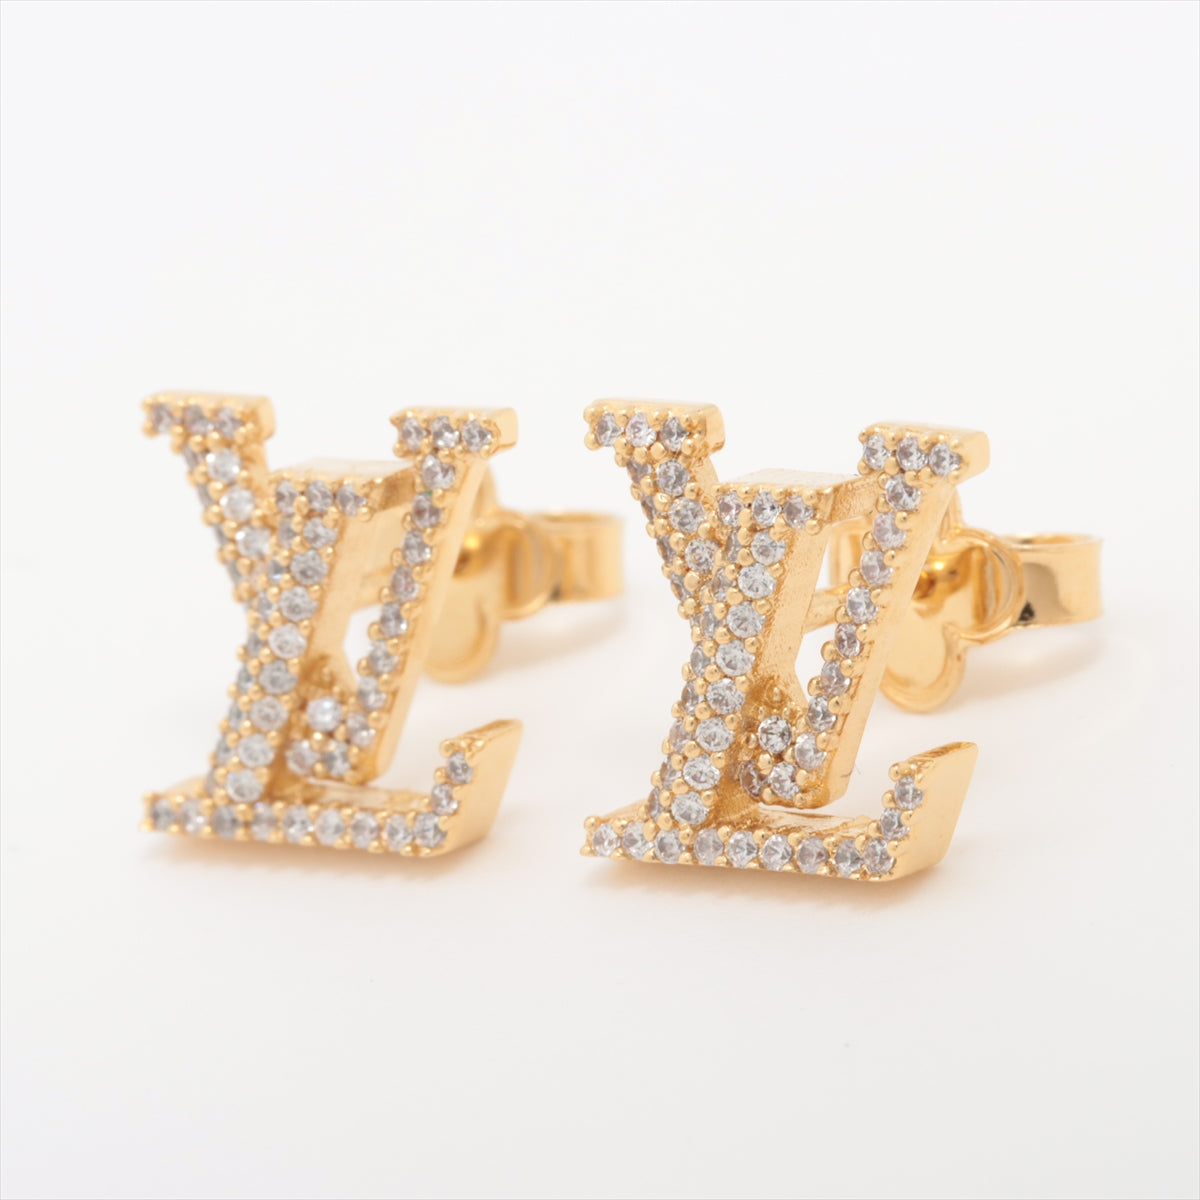 Louis Vuitton M00609 BOOKLE Dreil LV Iconic Strass VA4213 Piercing jewelry (for both ears) GP×inestone Gold